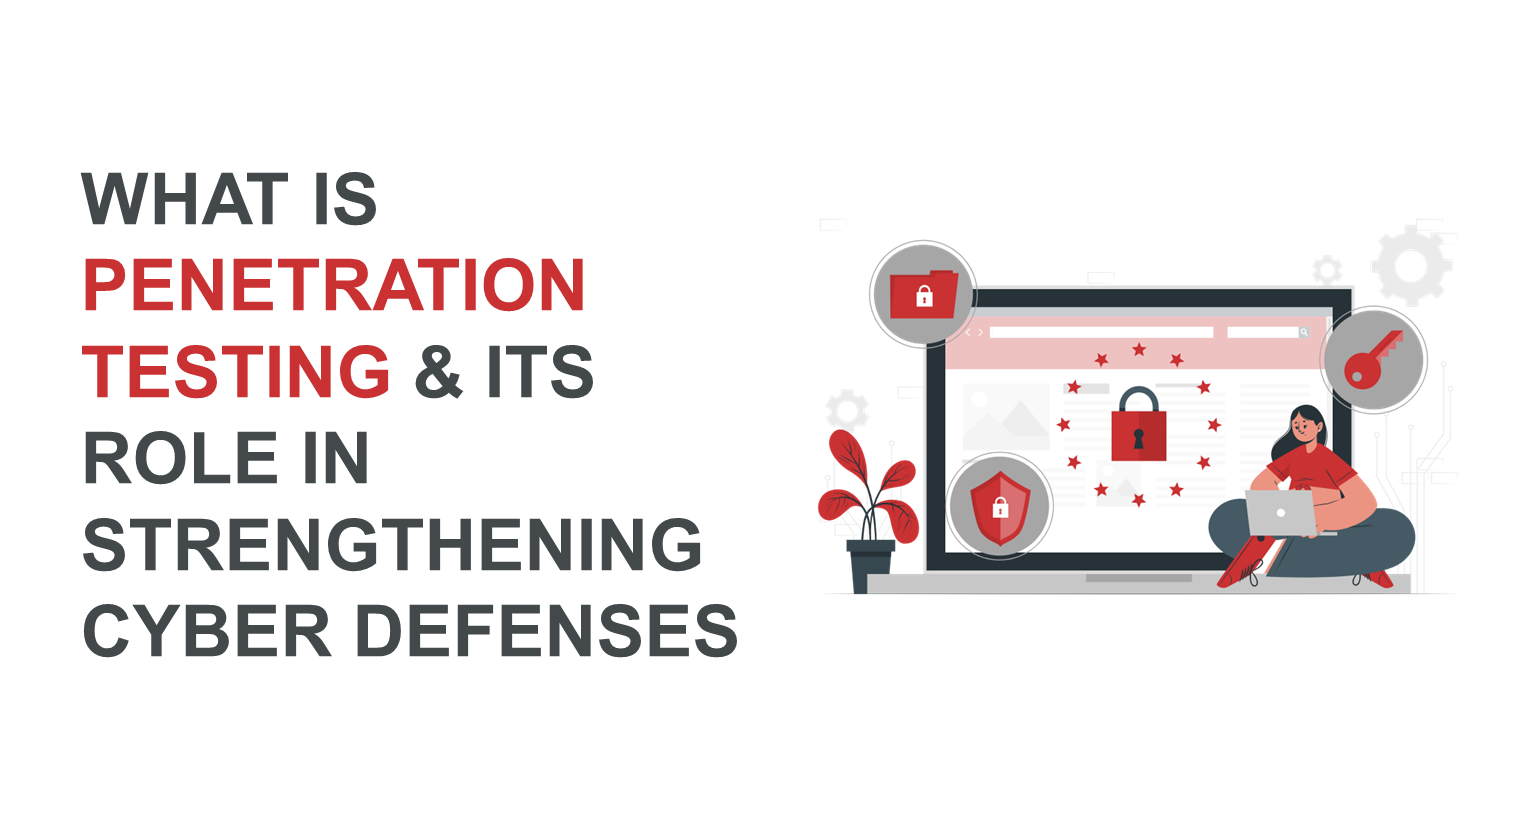 What is Penetration Testing and its Role in Strengthening Cyber Defenses